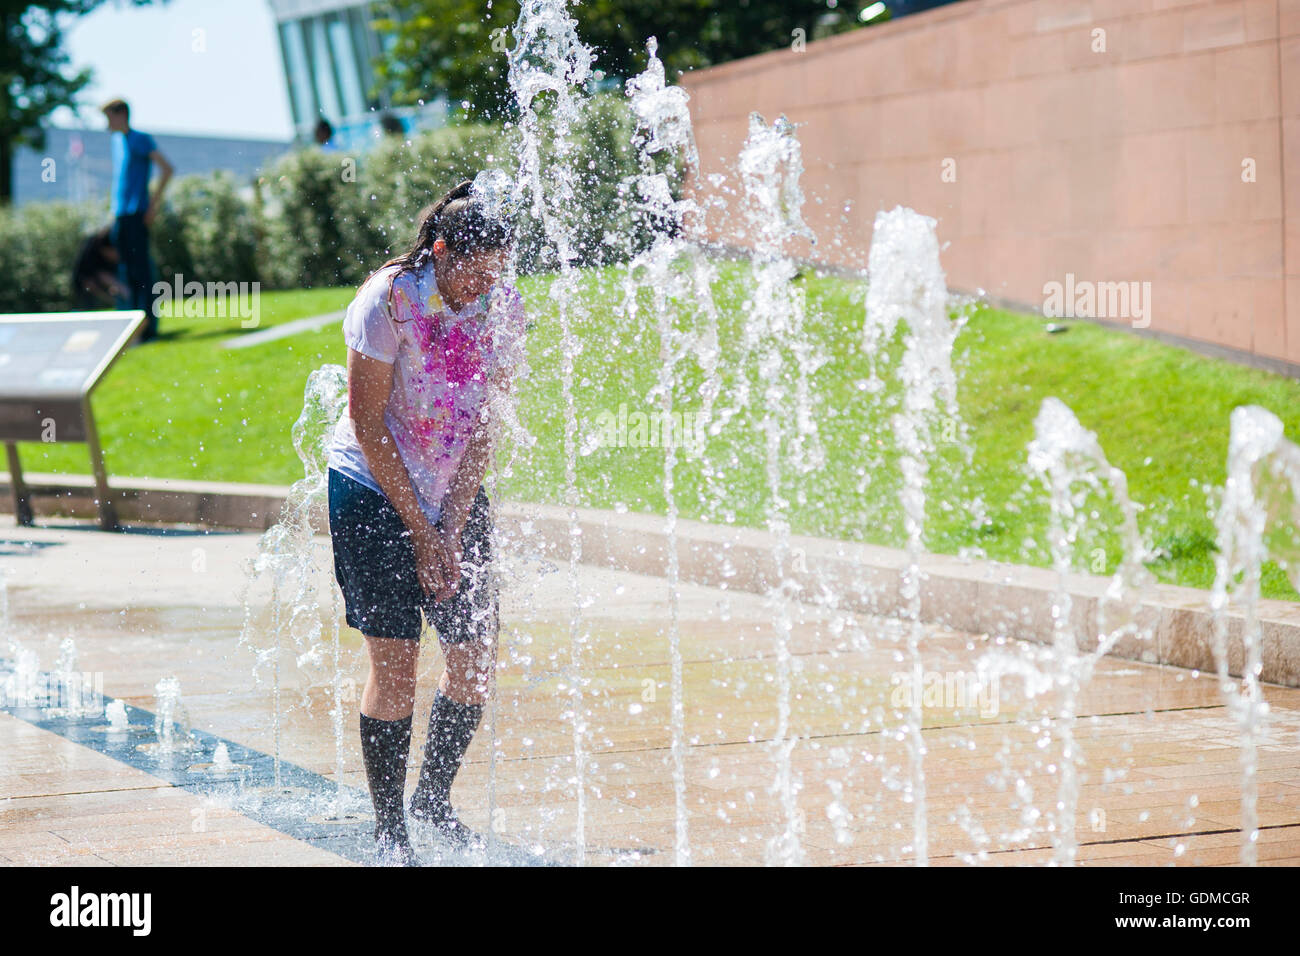 Liverpool, UK. 19th July 2016. A schoolgirl runs into a water fountain to cool down on the hottest day of the year. Credit:  Hayley Blackledge/Alamy Live News Stock Photo